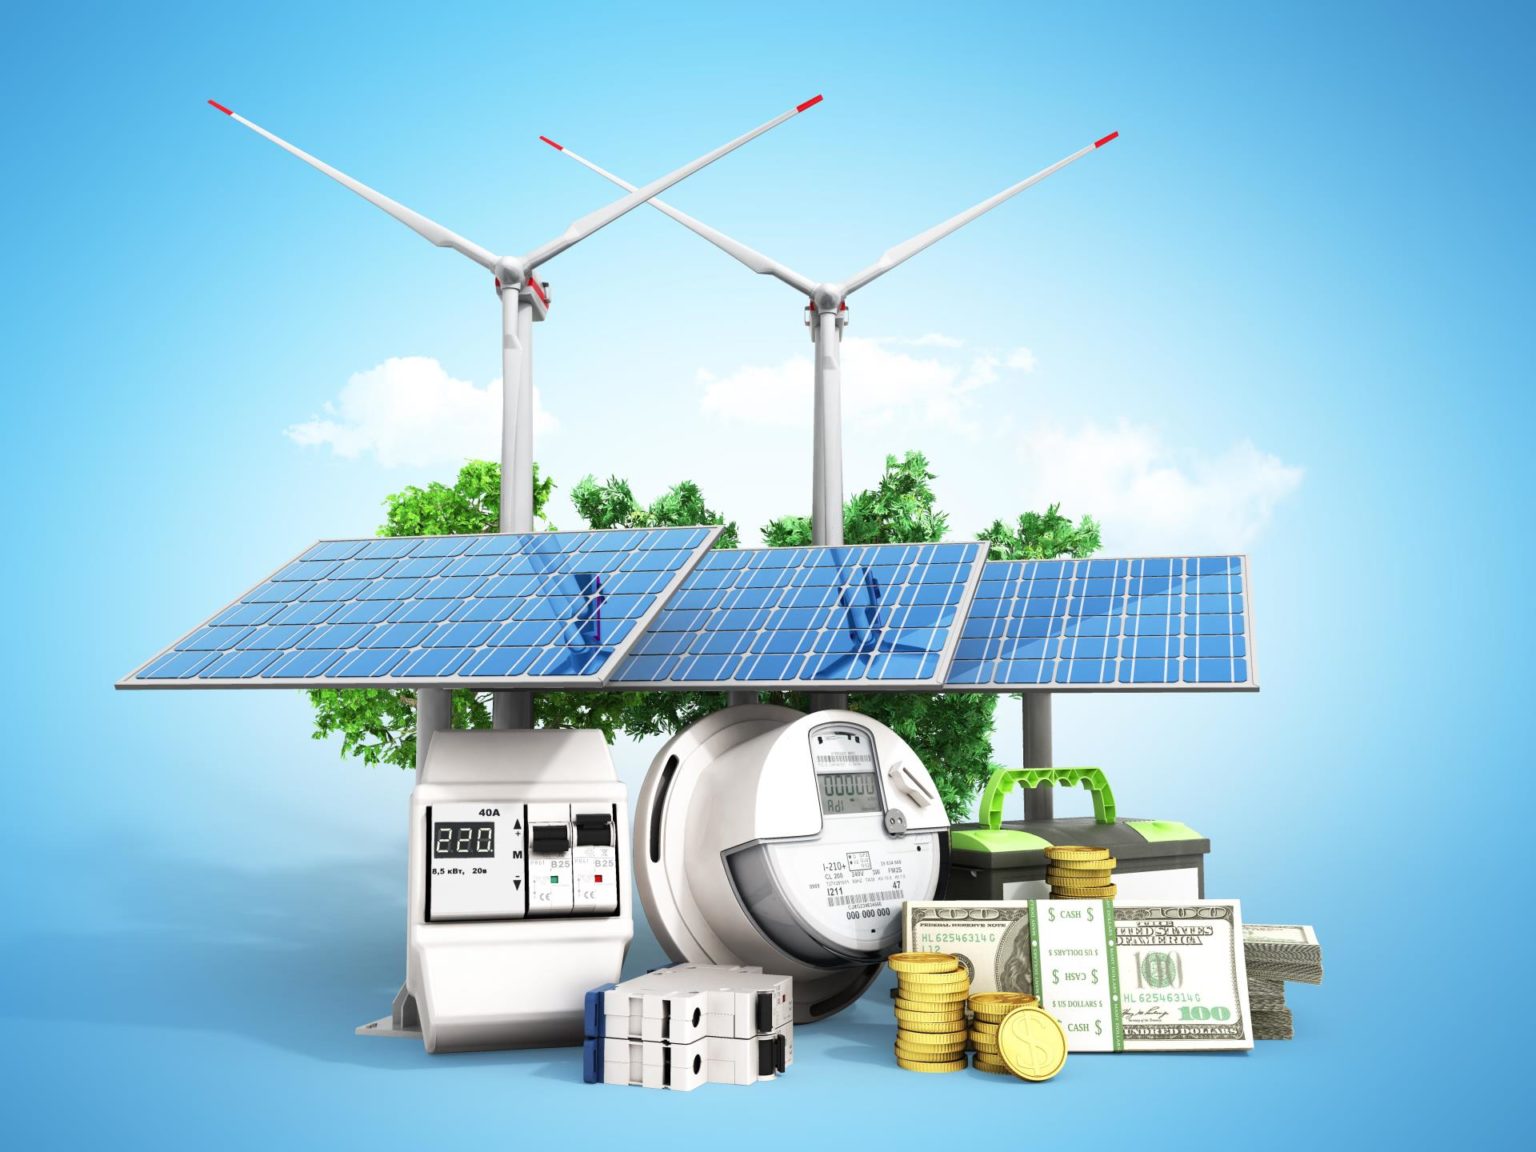 low-carbon-deals-fuel-the-energy-m-a-market-news-for-the-energy-sector